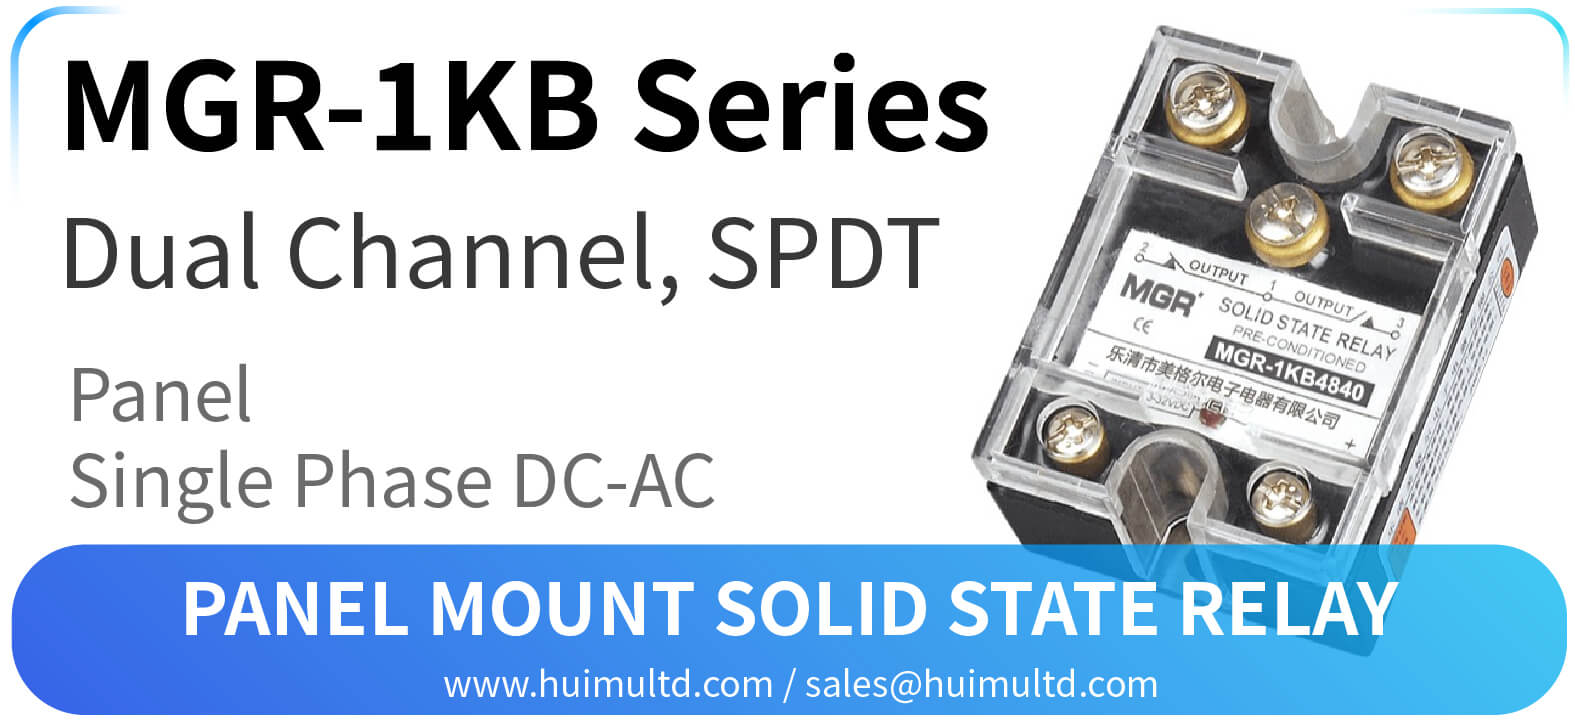 MGR-1KB Series Panel Mount Solid State Relay